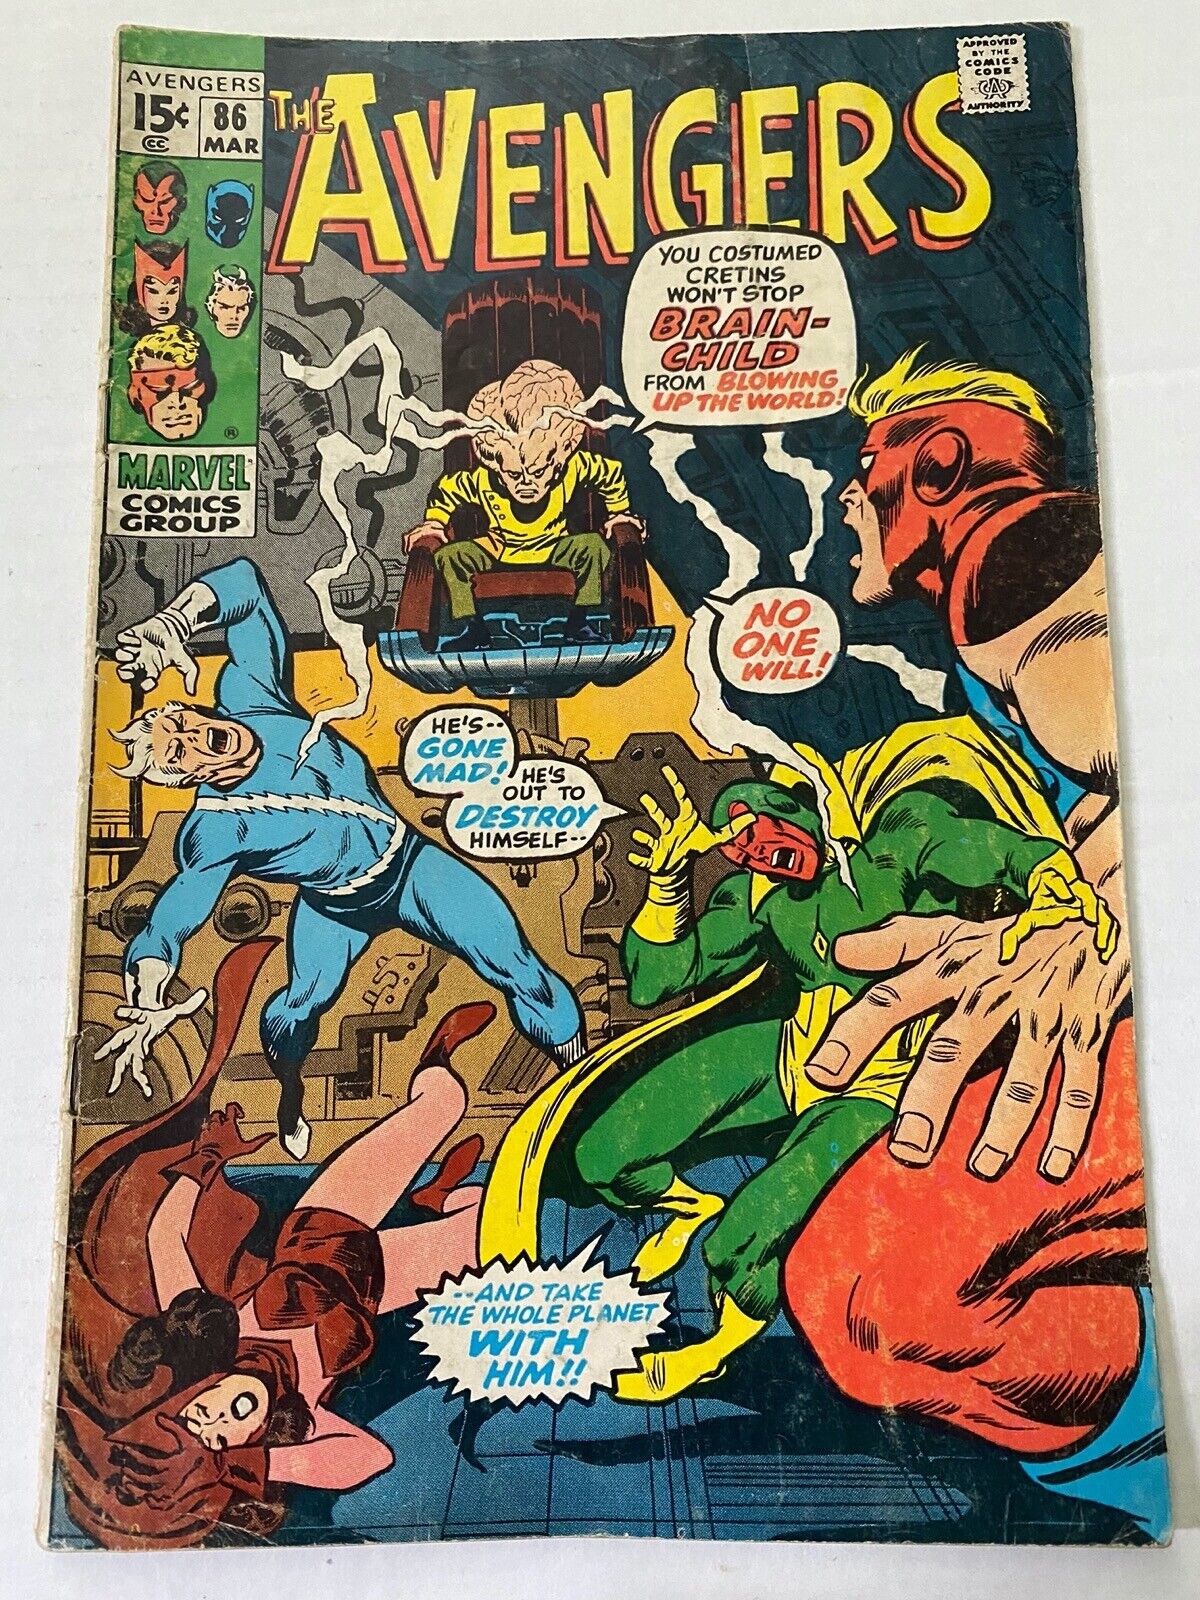 AVENGERS #86 Brain-Child to the Dark Tower Came 1971 J Buscema Cover 15¢ Marvel